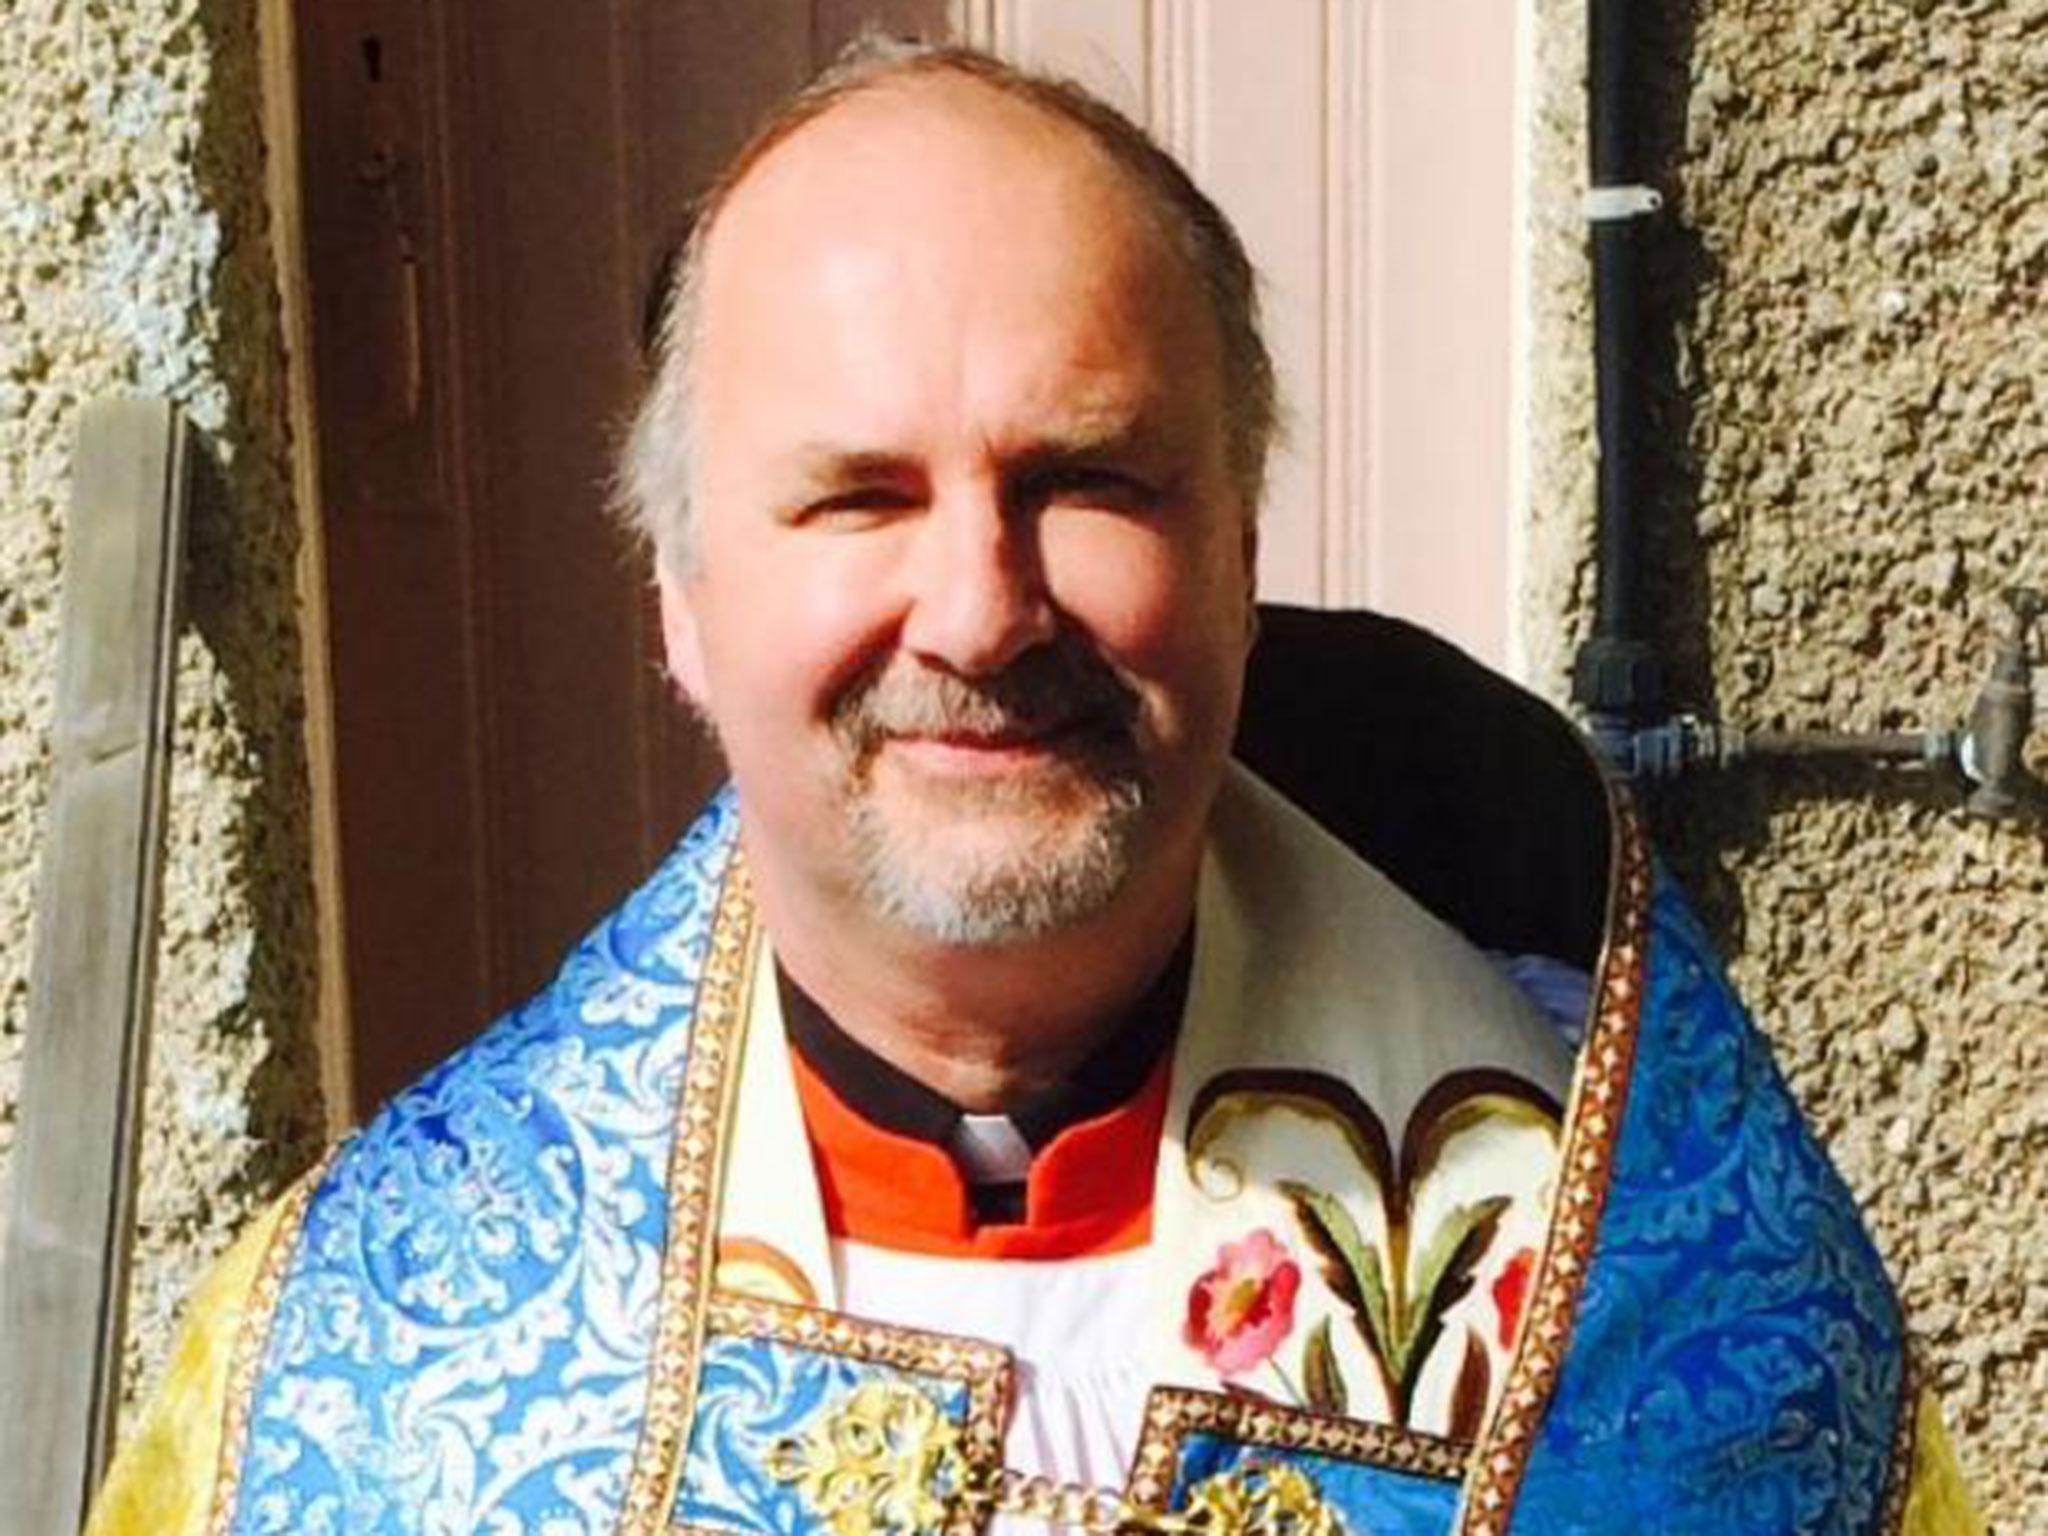 Mr Ashenden has resigned after nine years as one of the Queen's chaplains